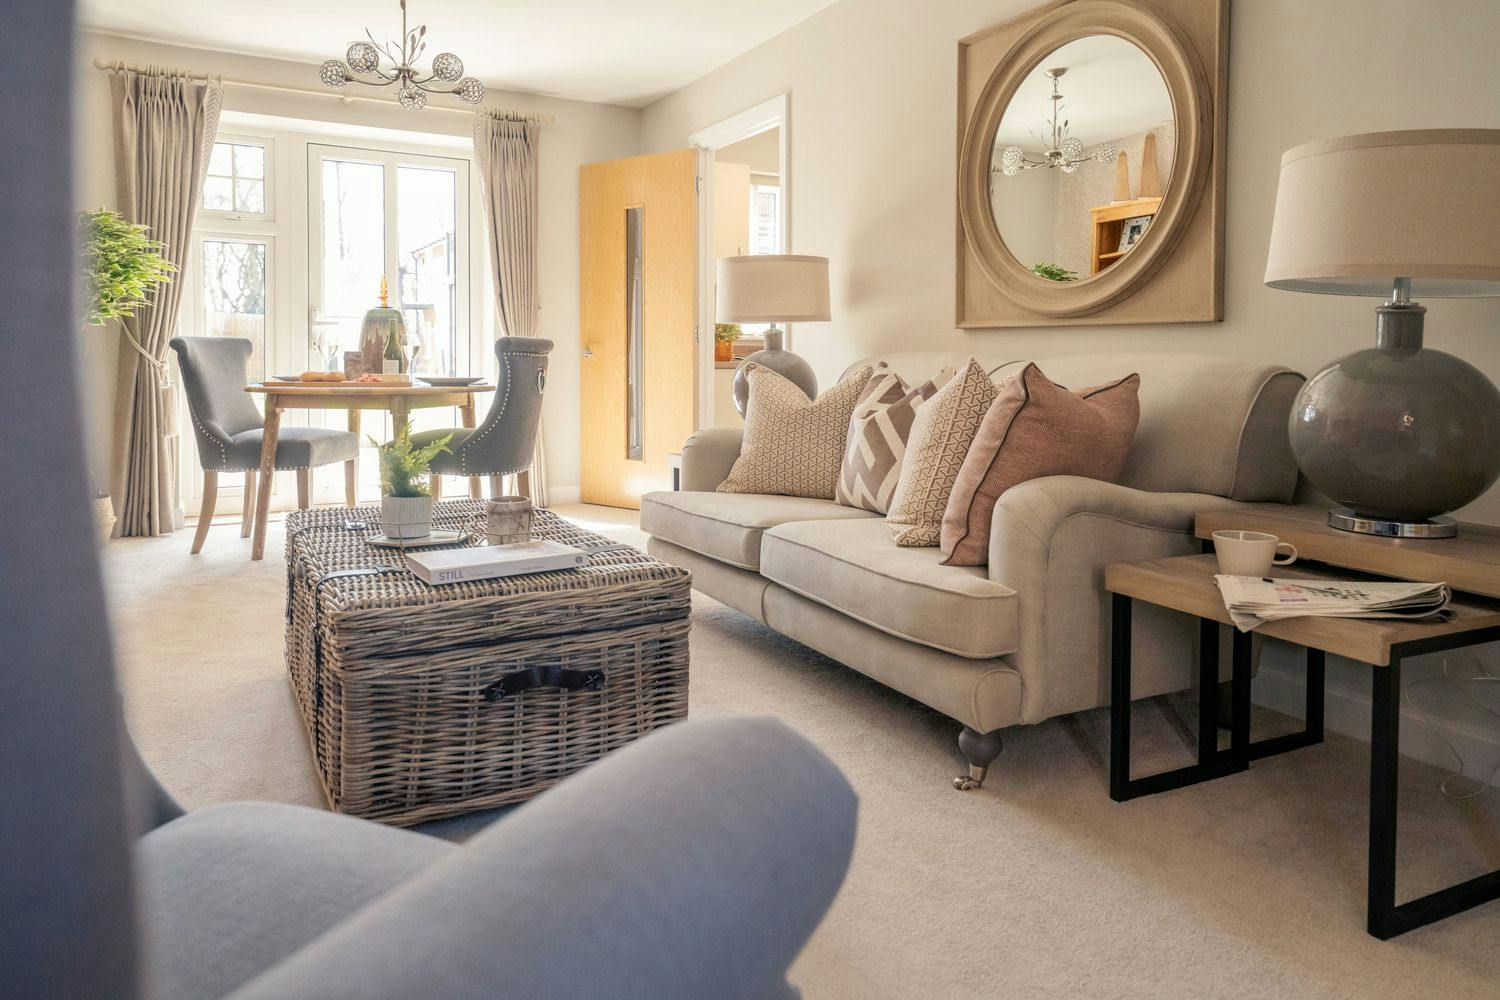 Living Room at Glenhills Court Retirement Development in Leicester, Leicestershire 